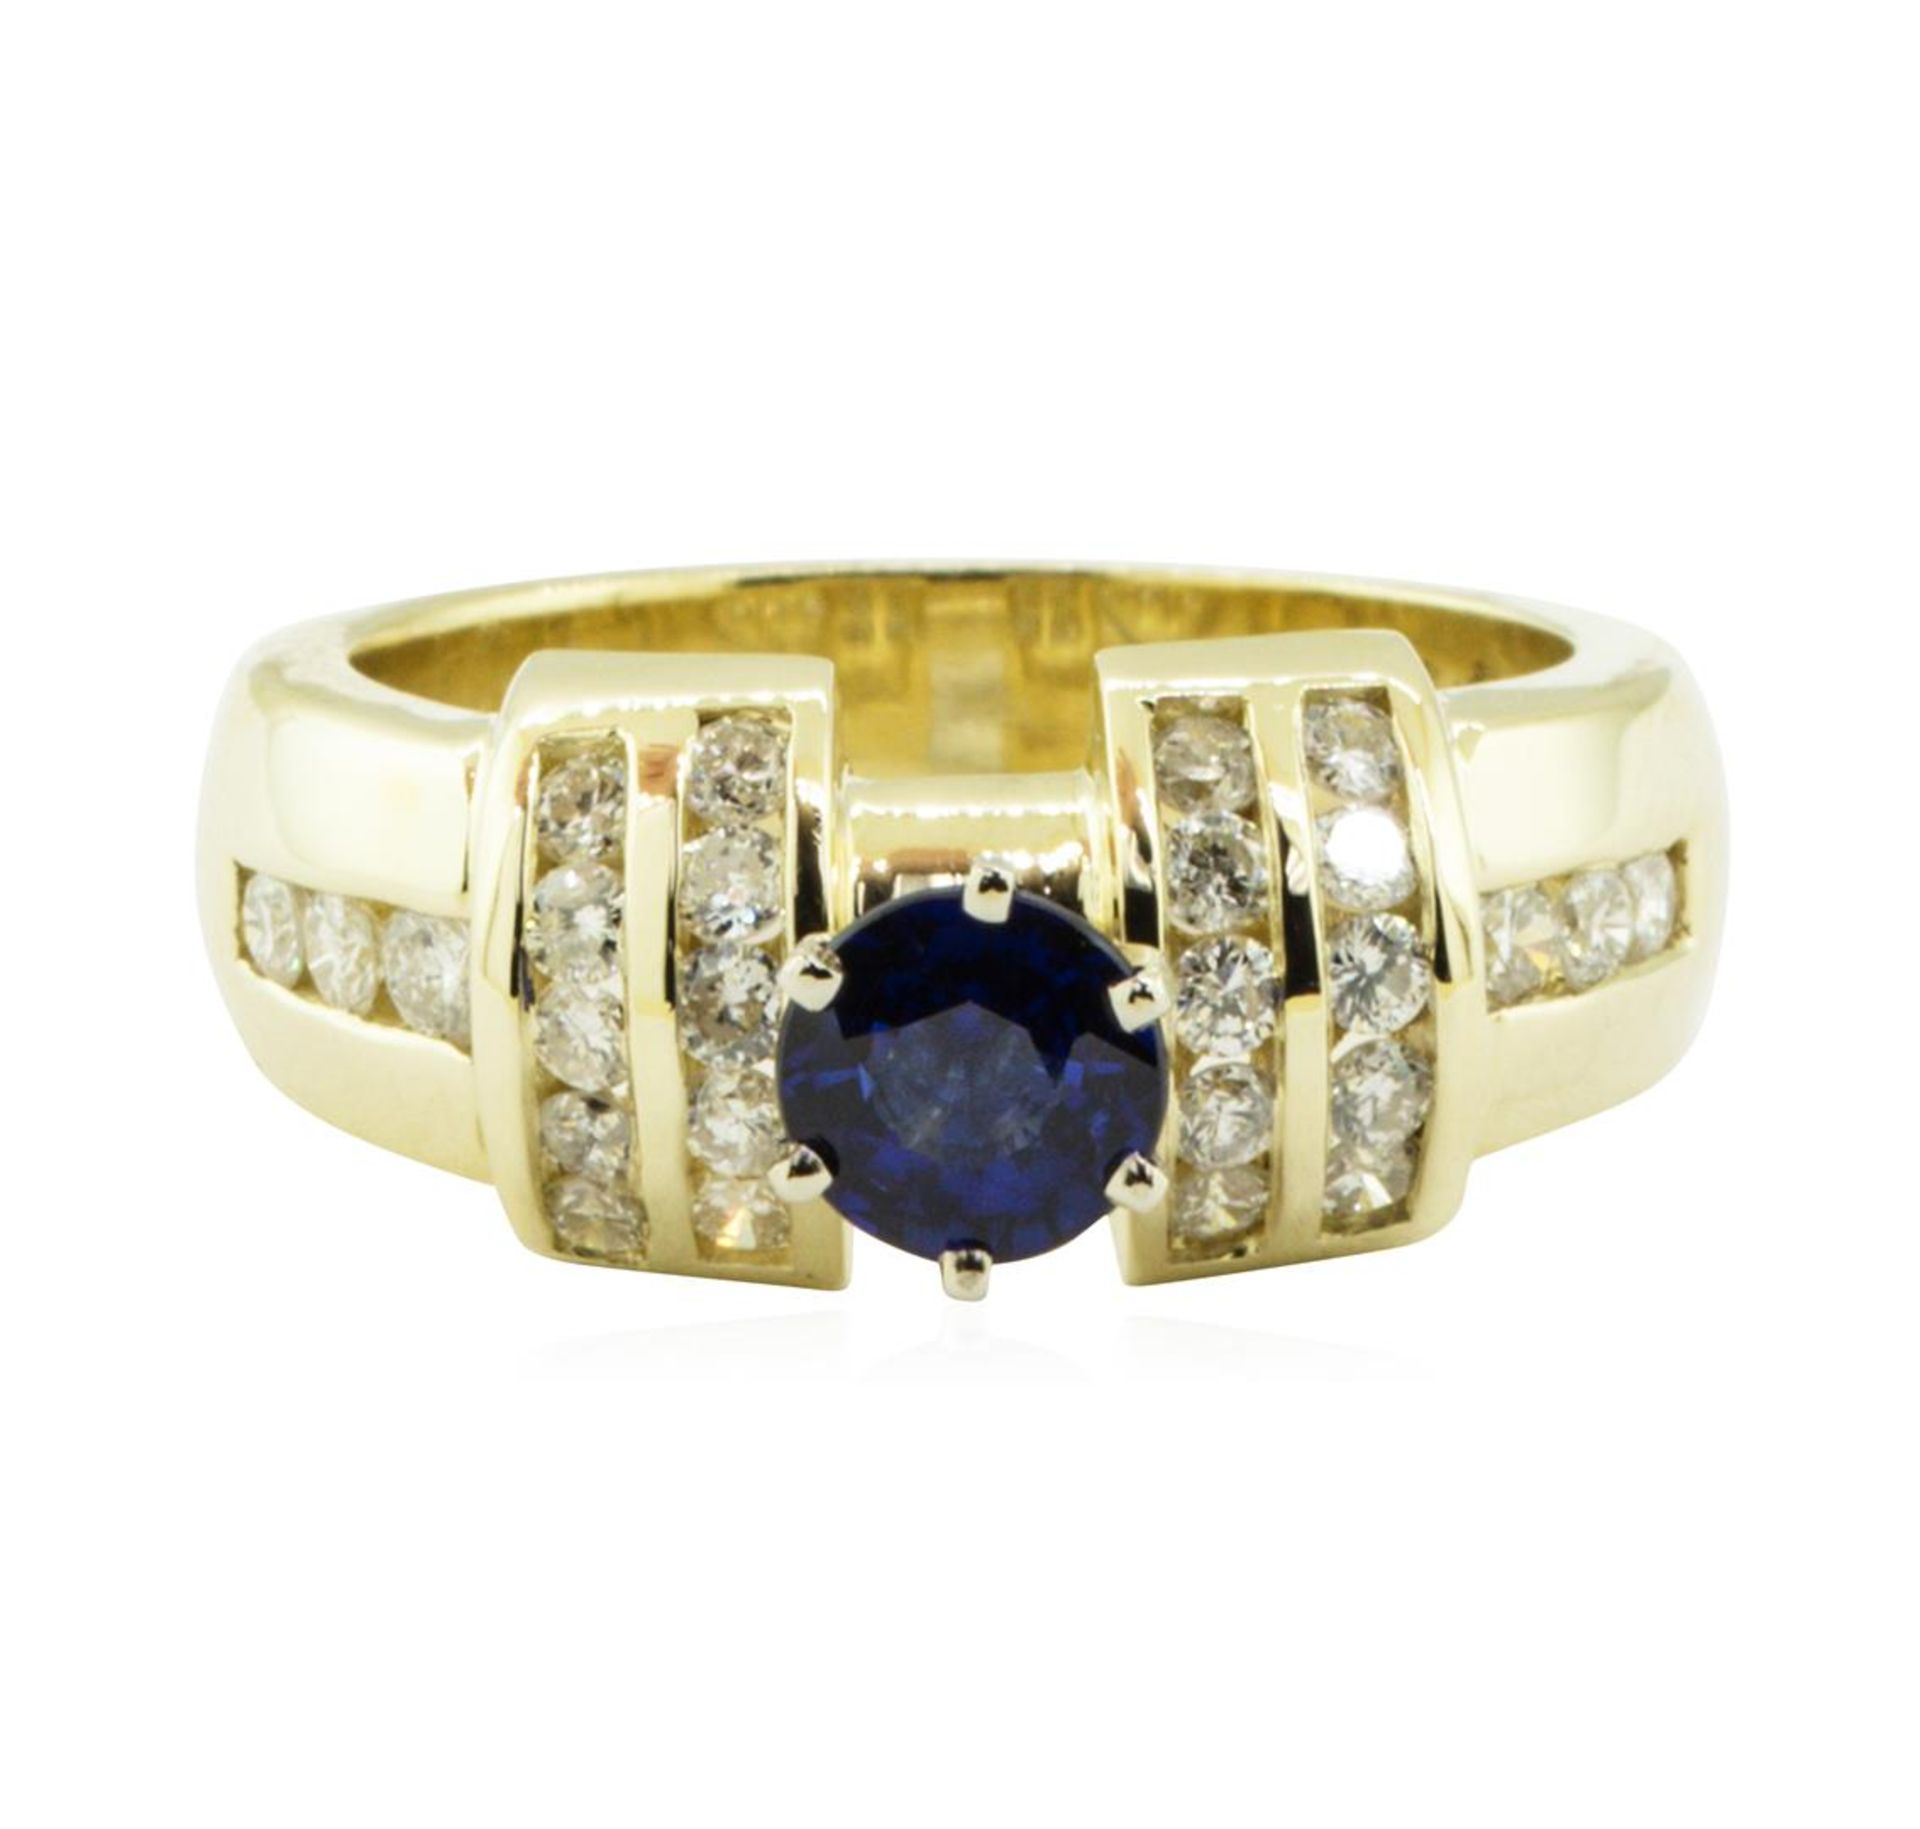 1.40 ctw Round Brilliant Blue Sapphire And Diamond Ring - 14KT Yellow Gold - Image 2 of 5